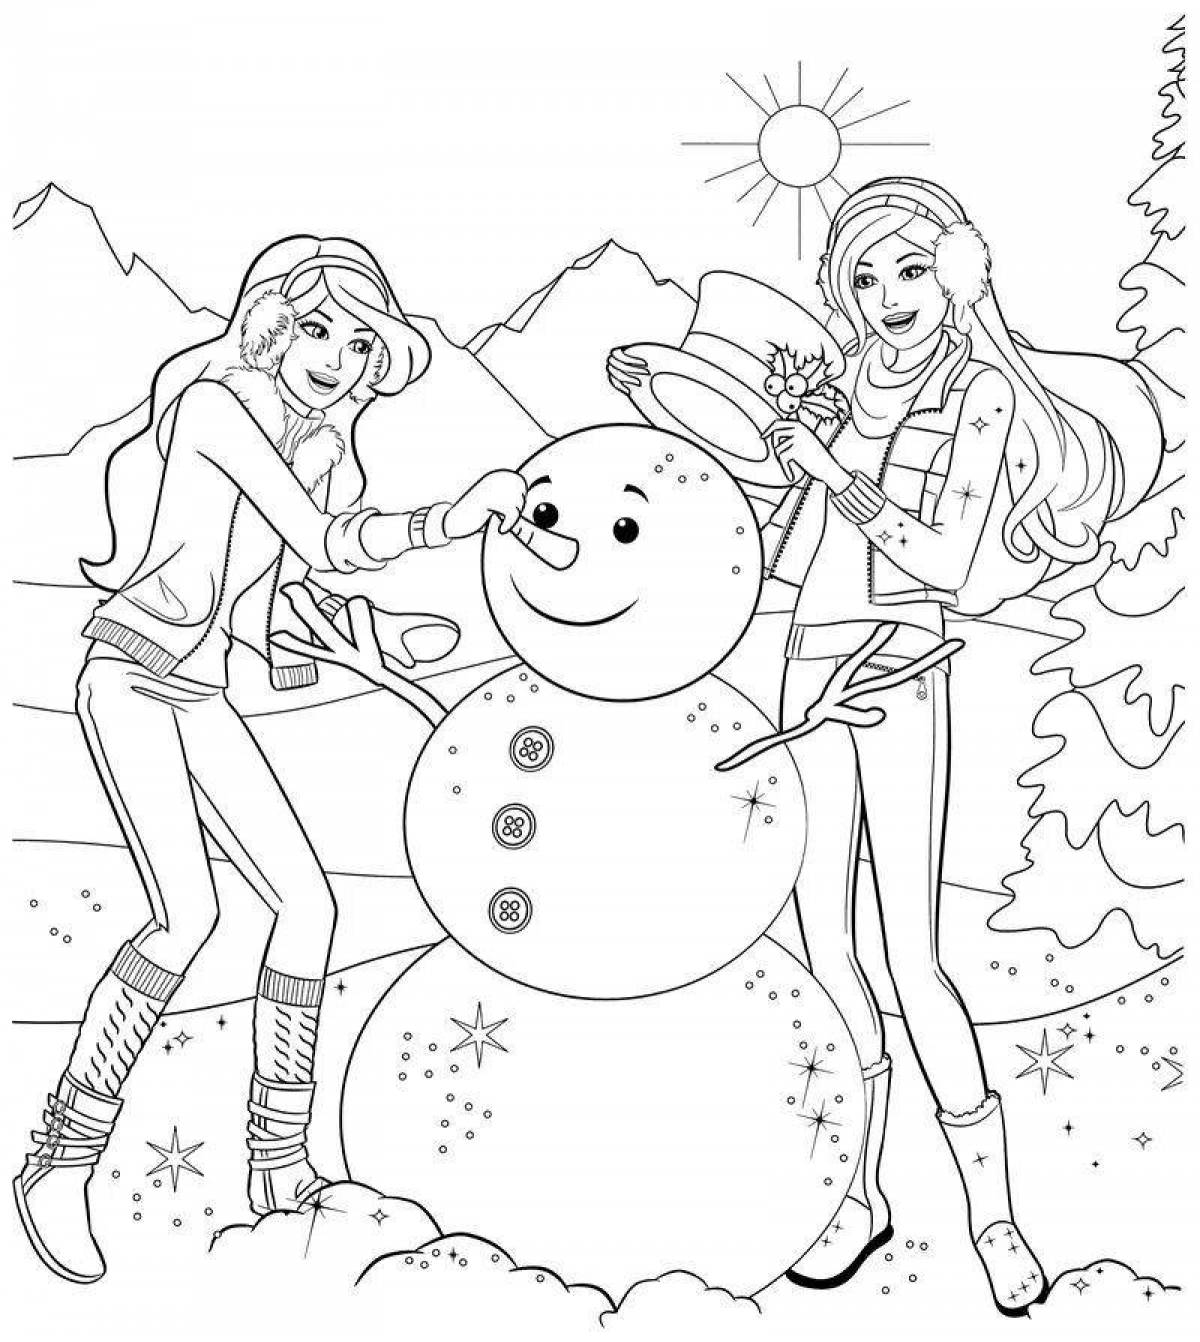 Merry Christmas coloring book for girls